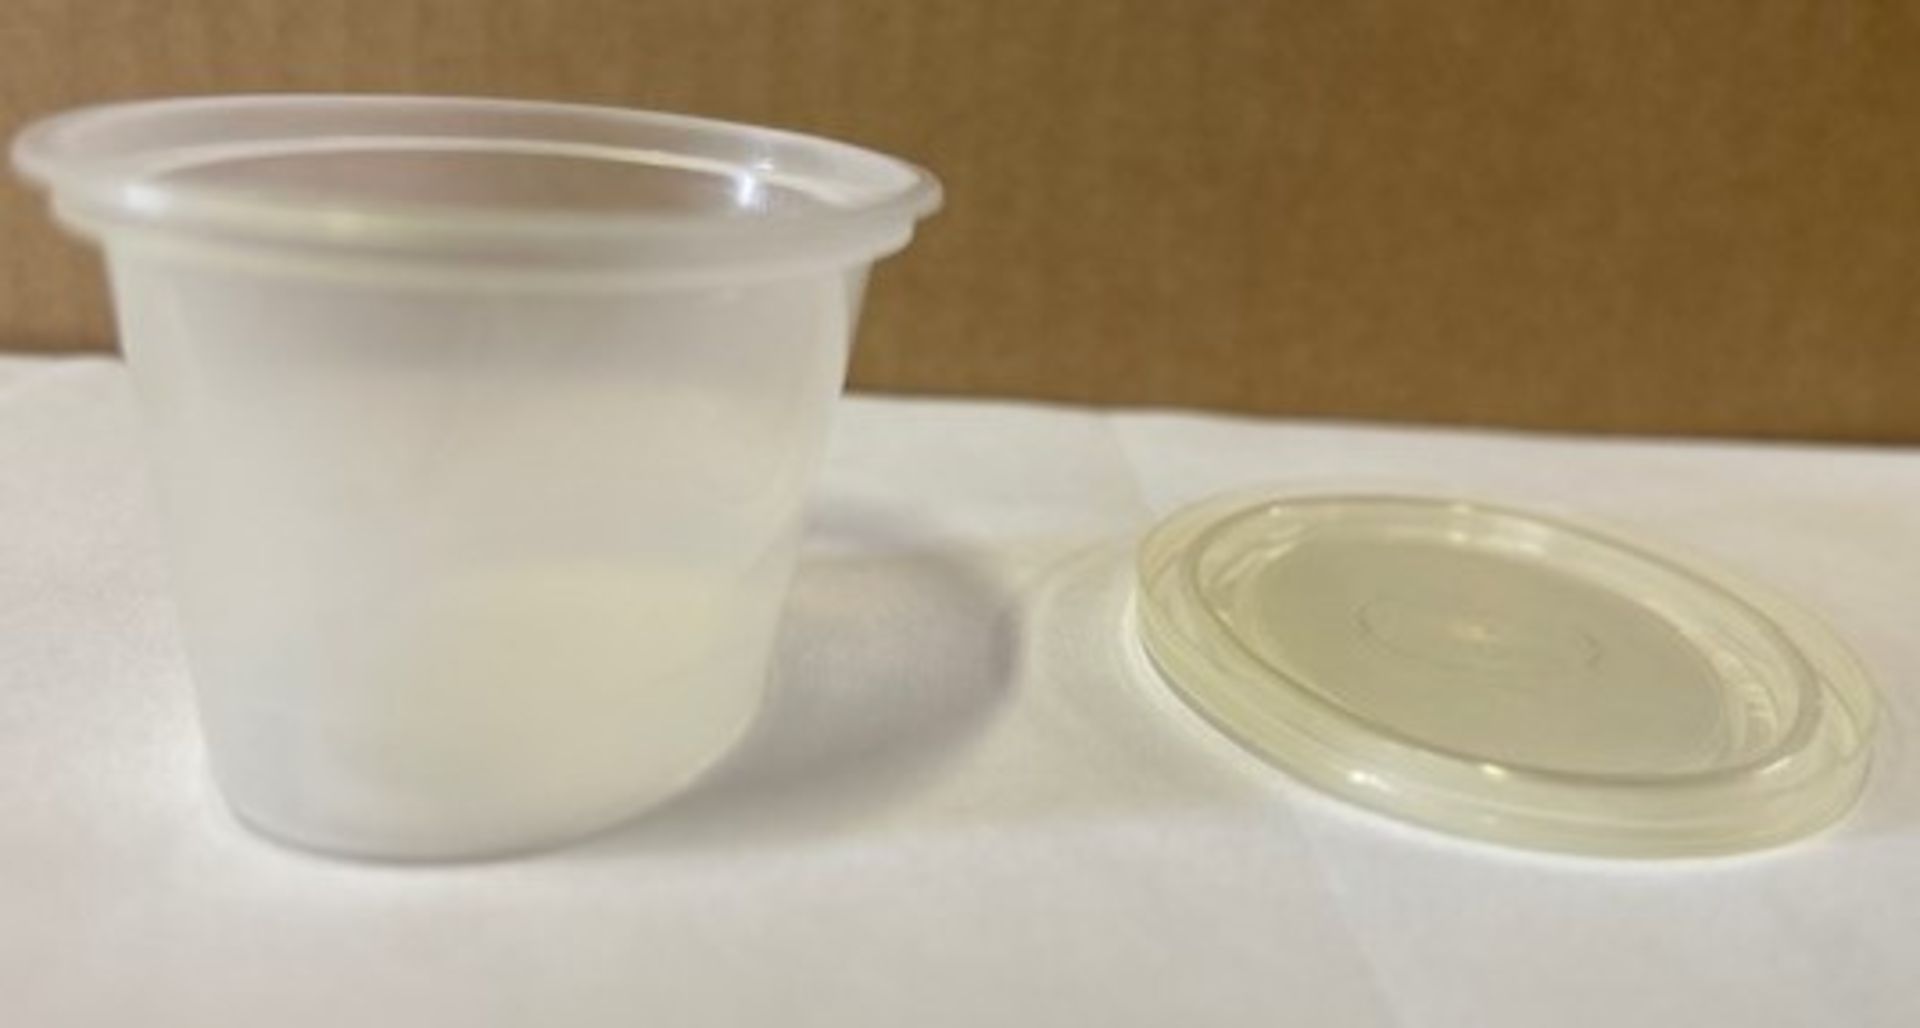 (3) Cases - Pactiv #YE502 2 Oz.Ellipso Portion Cup Combo (Pack 1000) - Image 2 of 3